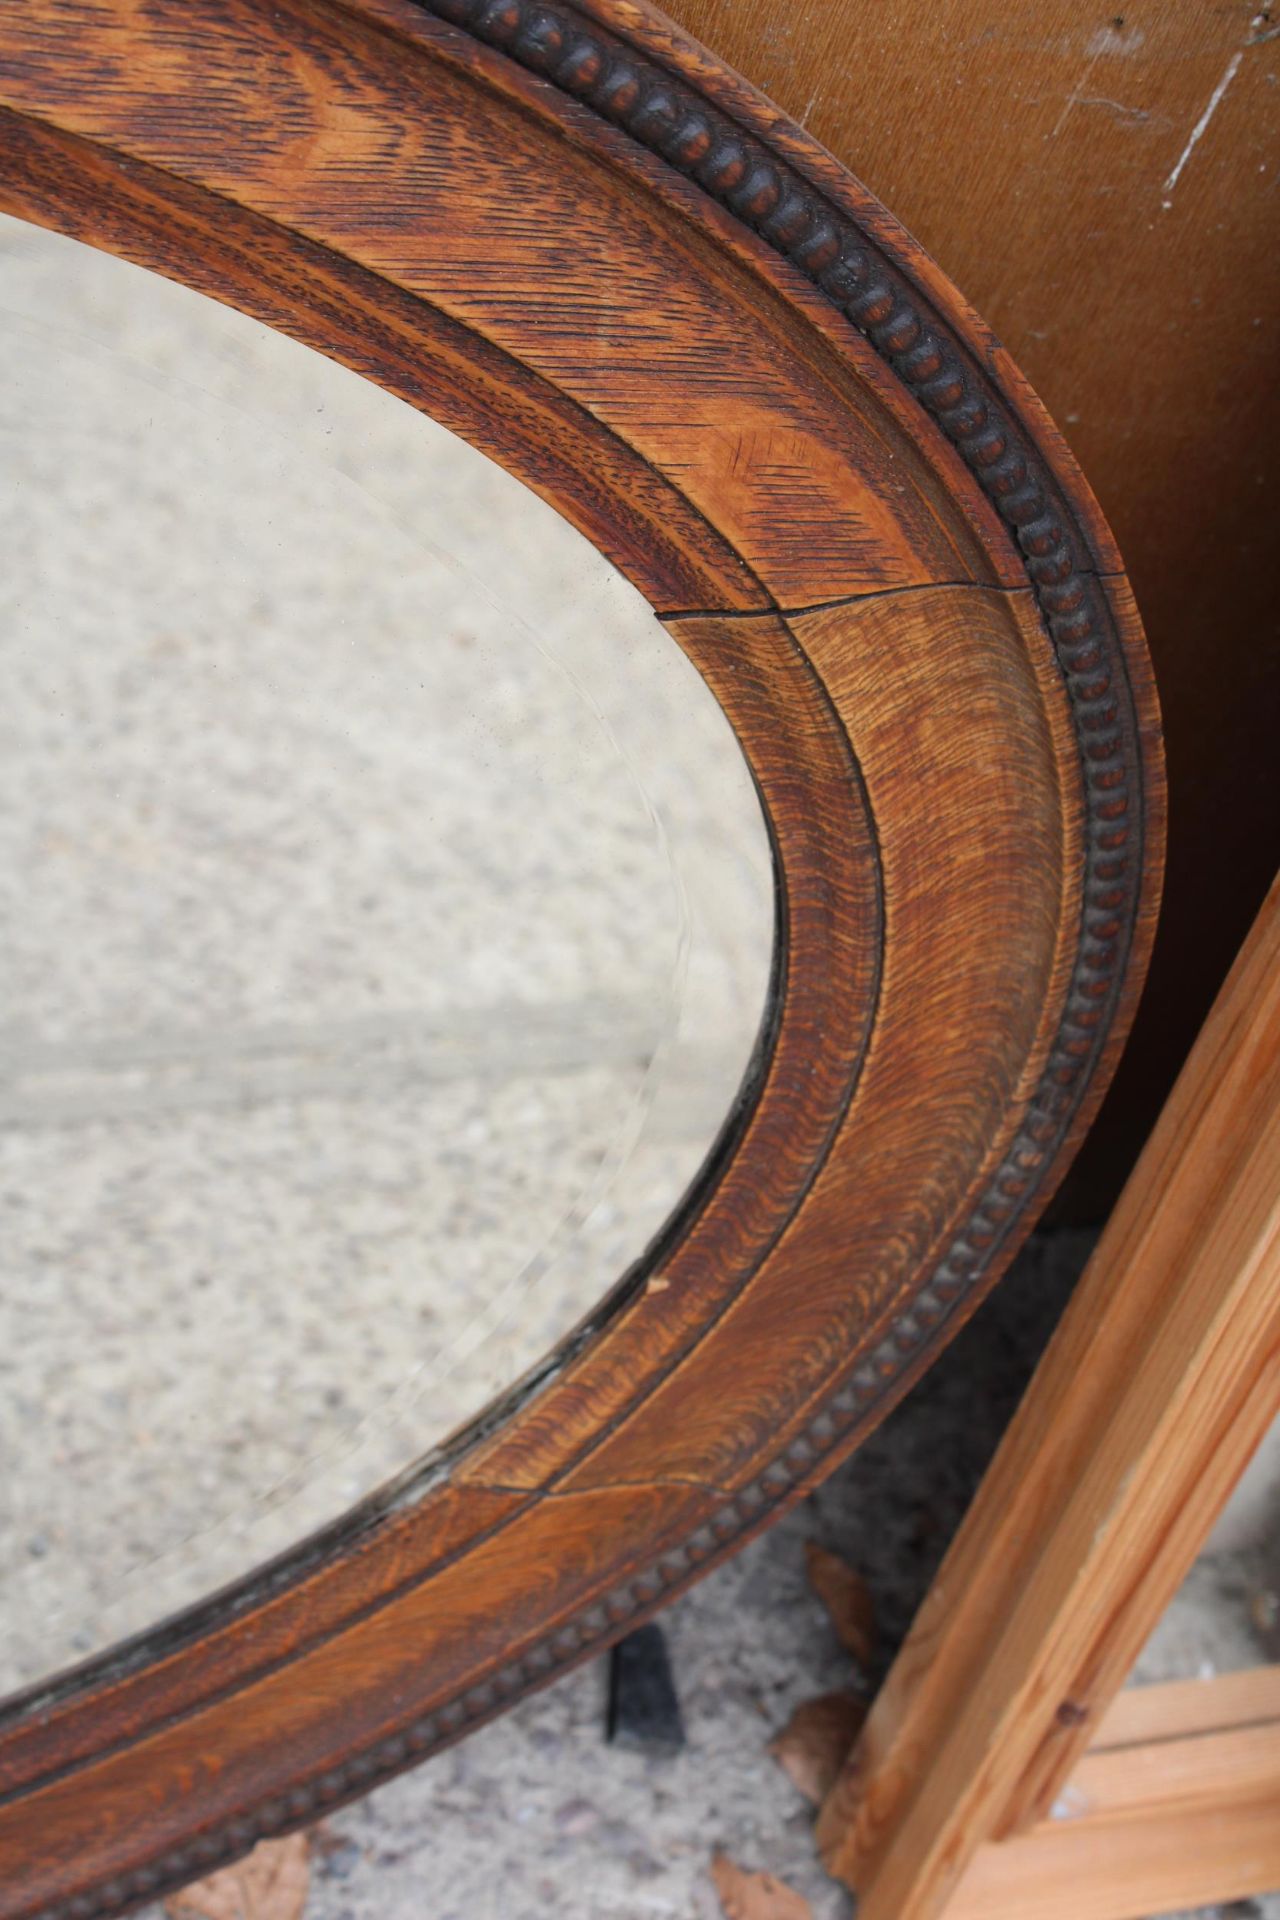 A MID 20TH CENTURY OVAL OAK BEVEL EDGED MIRROR 34" X 24" - Image 3 of 3